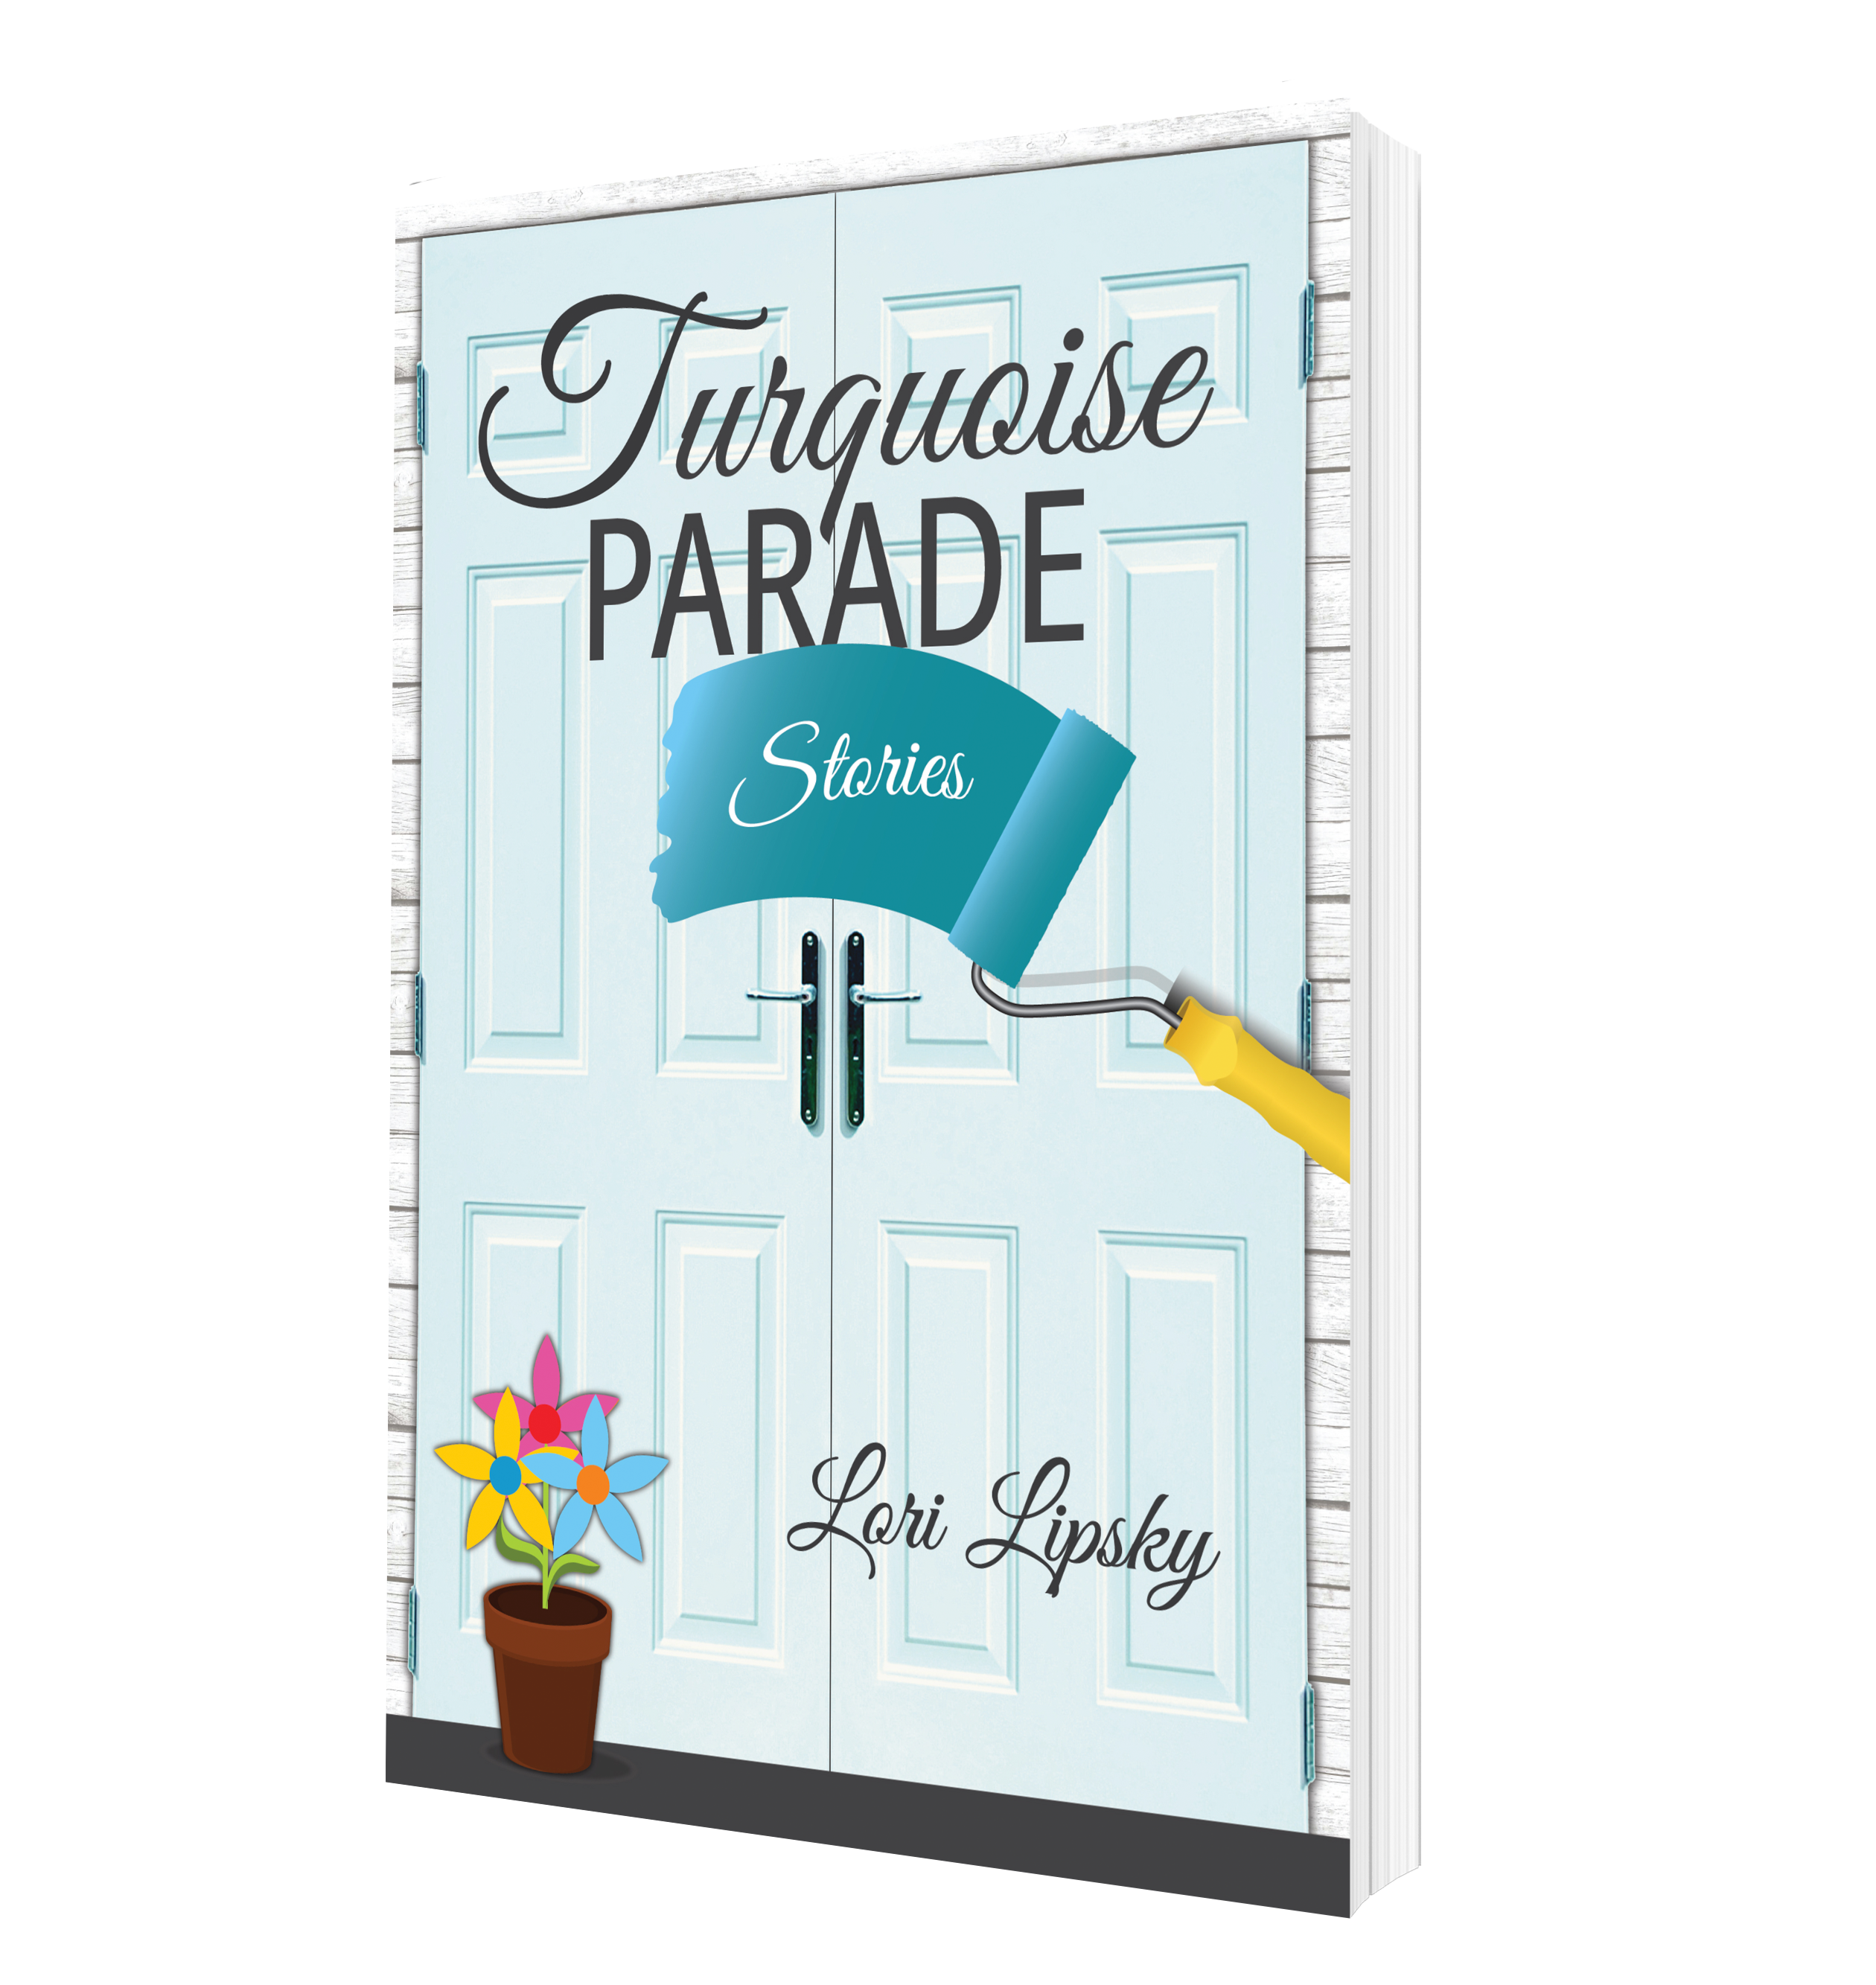 Turquoise Parade, a collection of short fiction stories by Lori Lipsky.